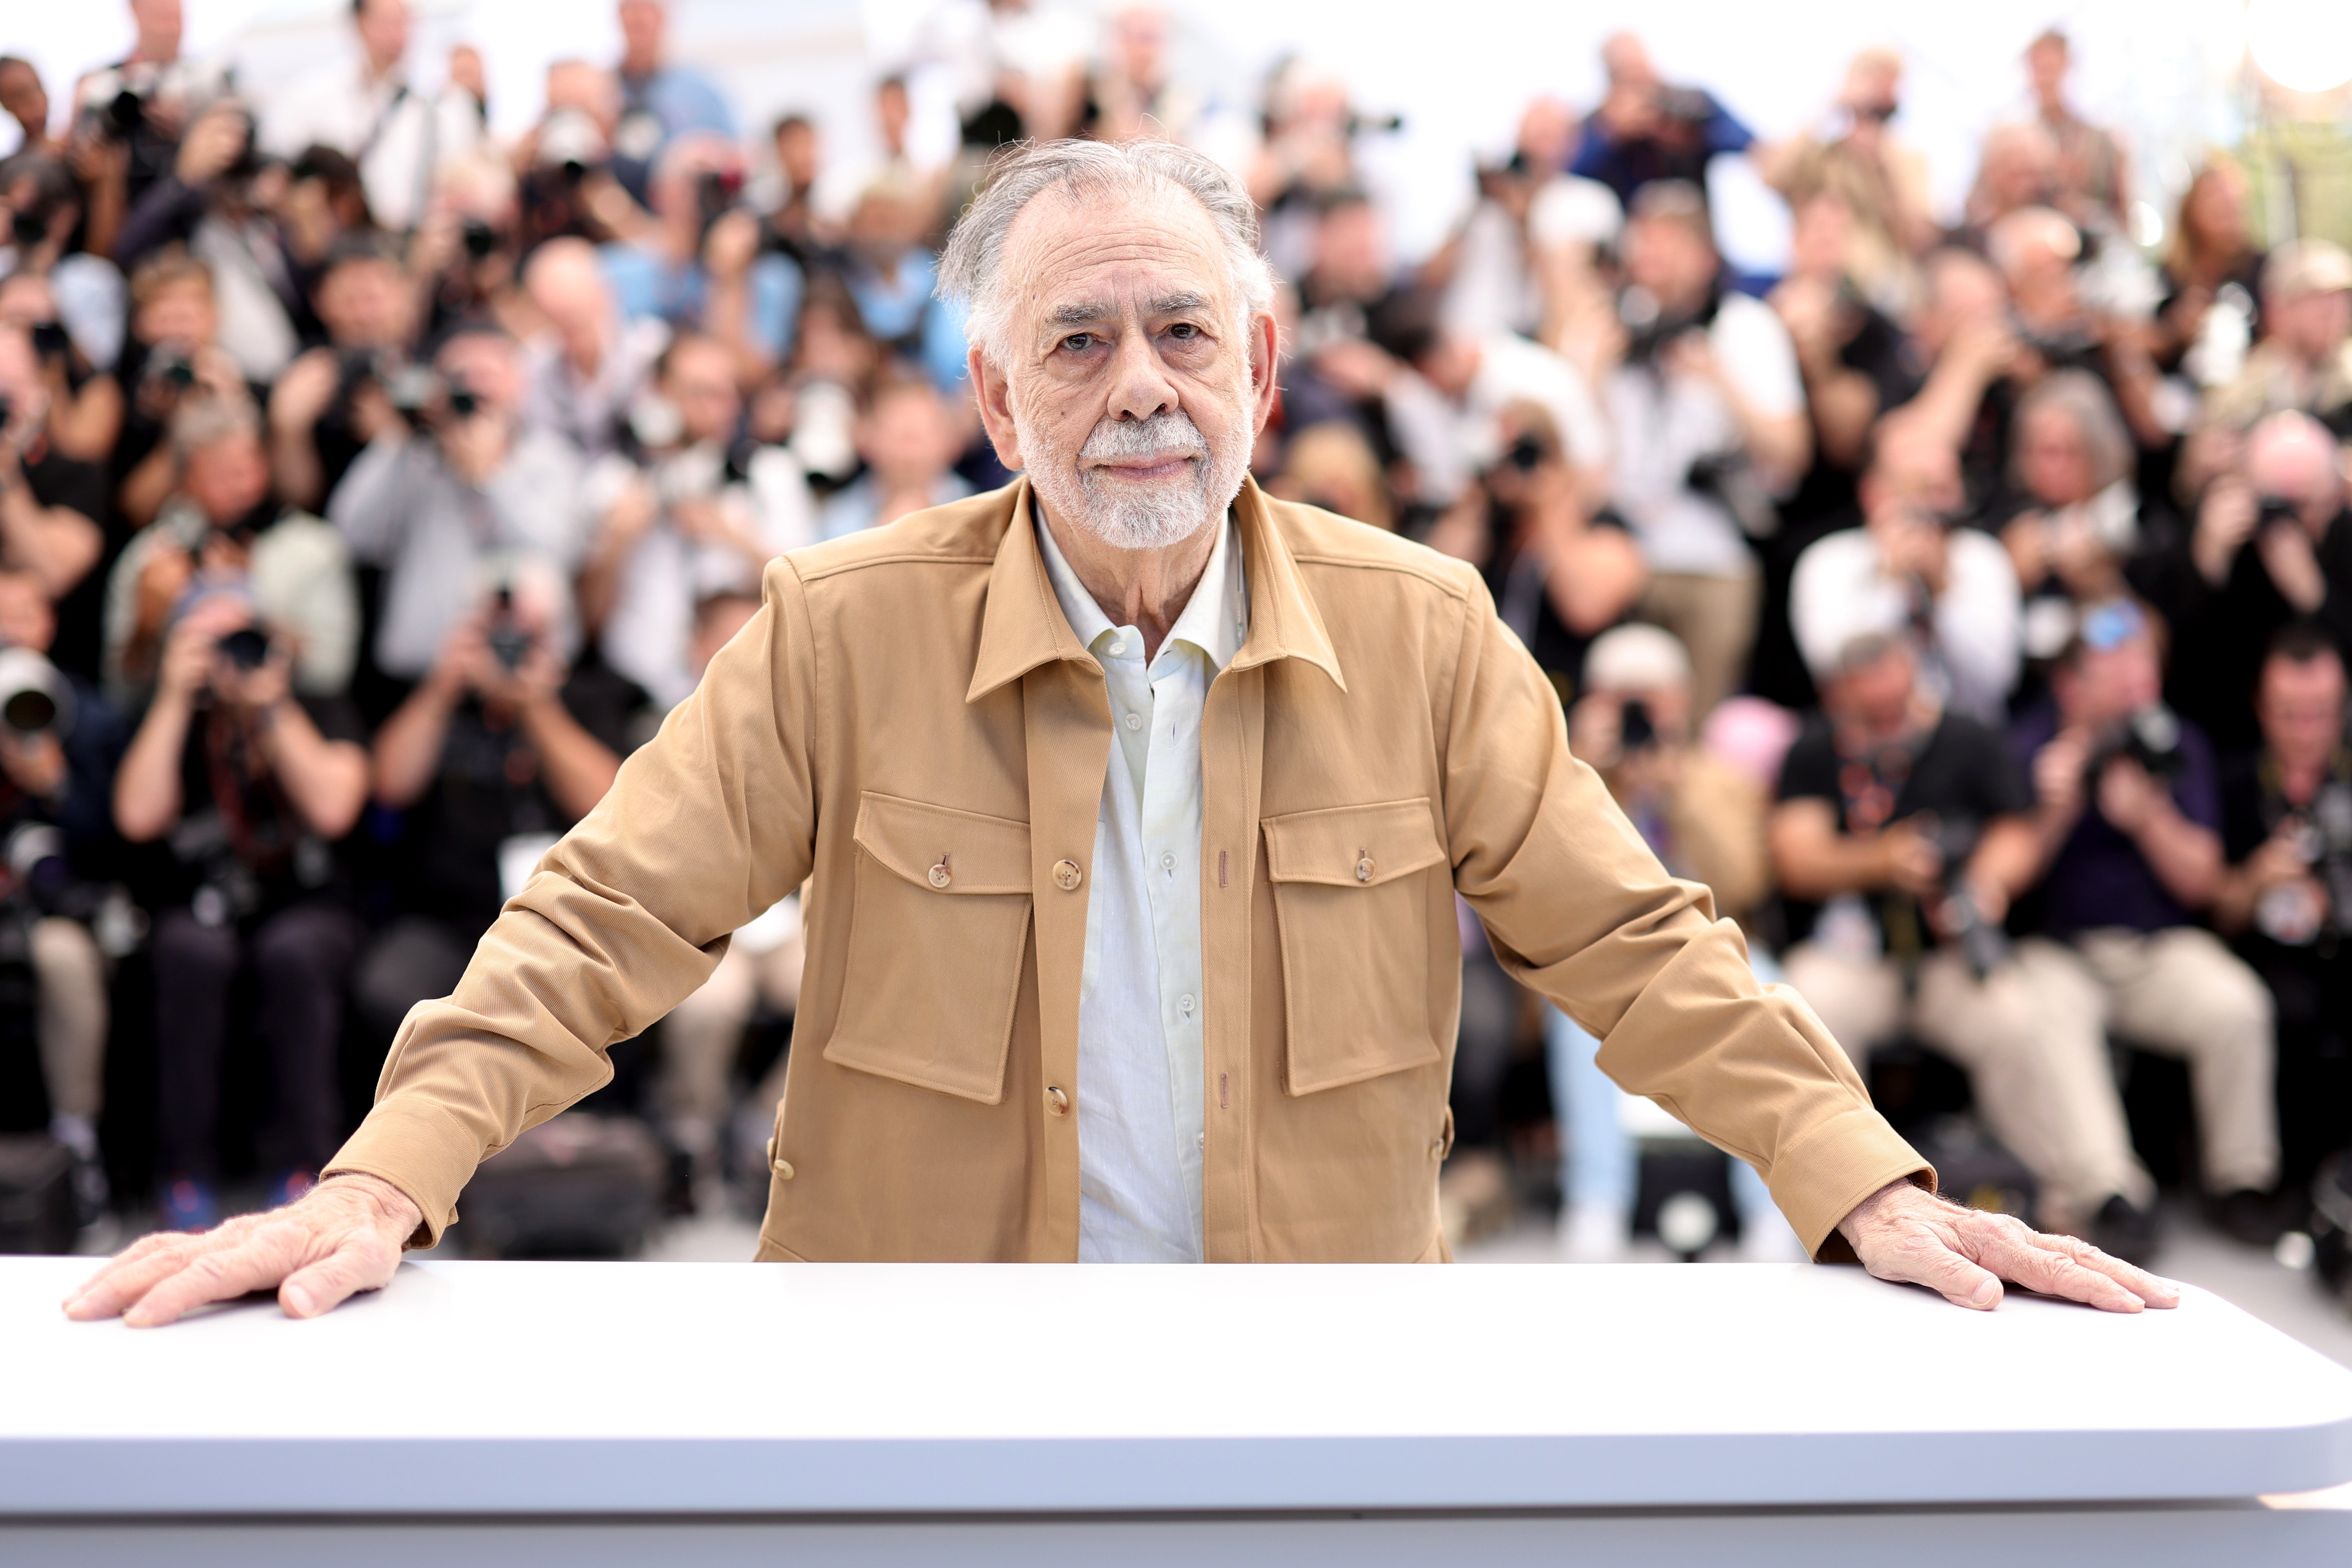 Francis Ford Coppola attends the ‘Megalopolis' Photocall at the 77th annual Cannes Film Festival